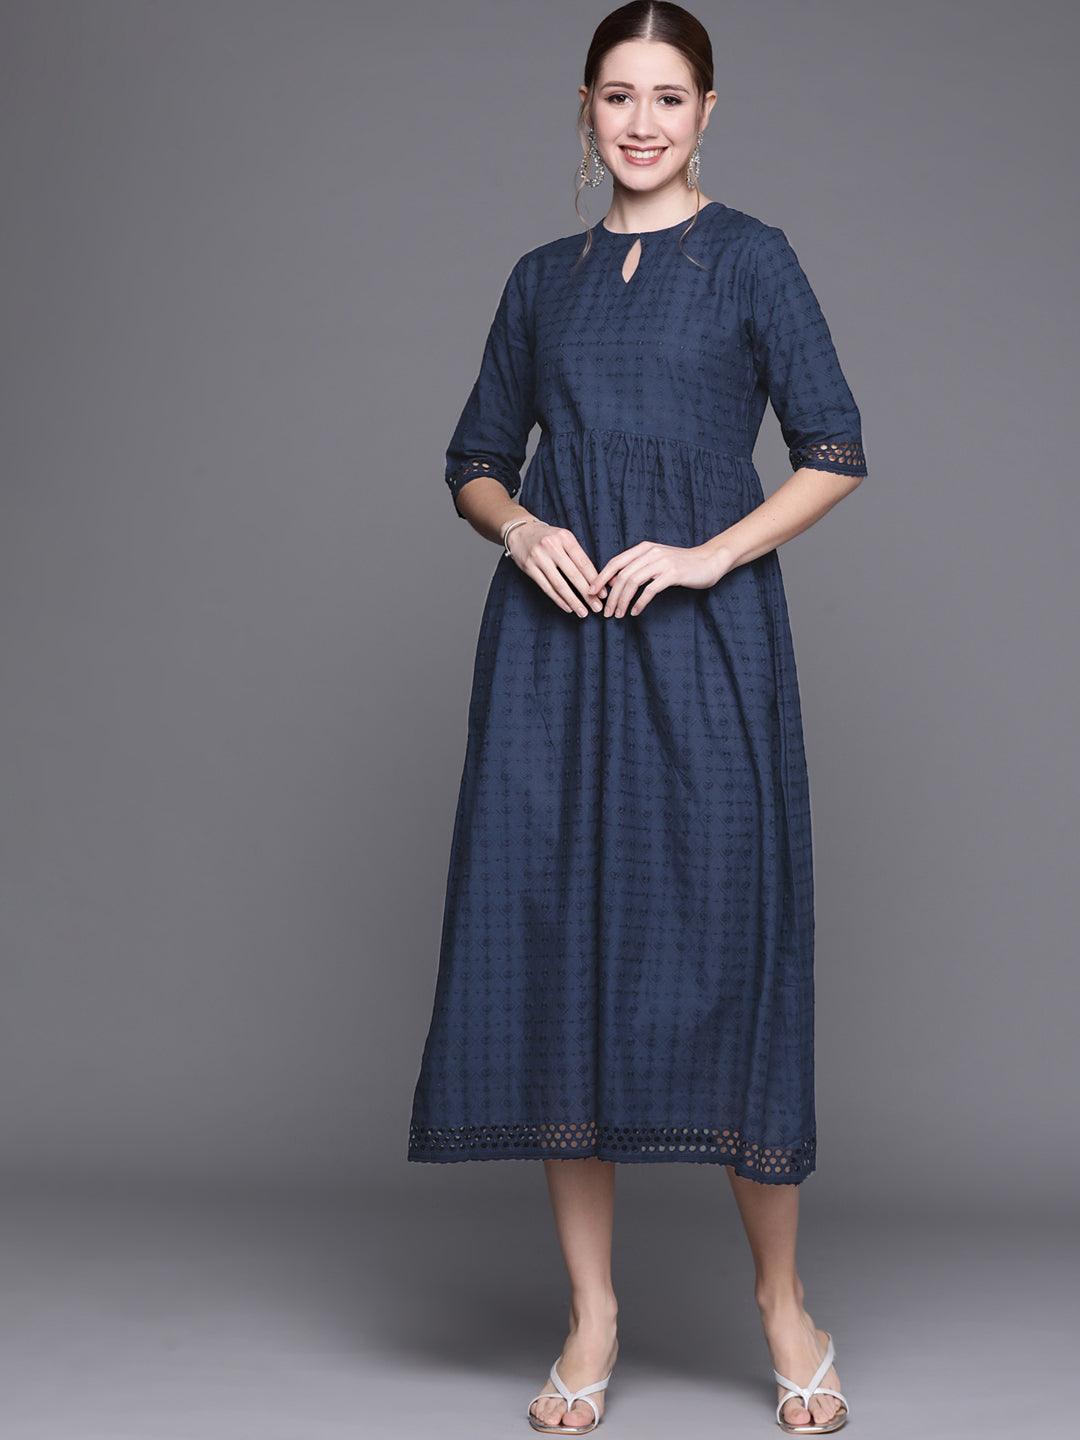 Blue Embroidered Cotton Dress